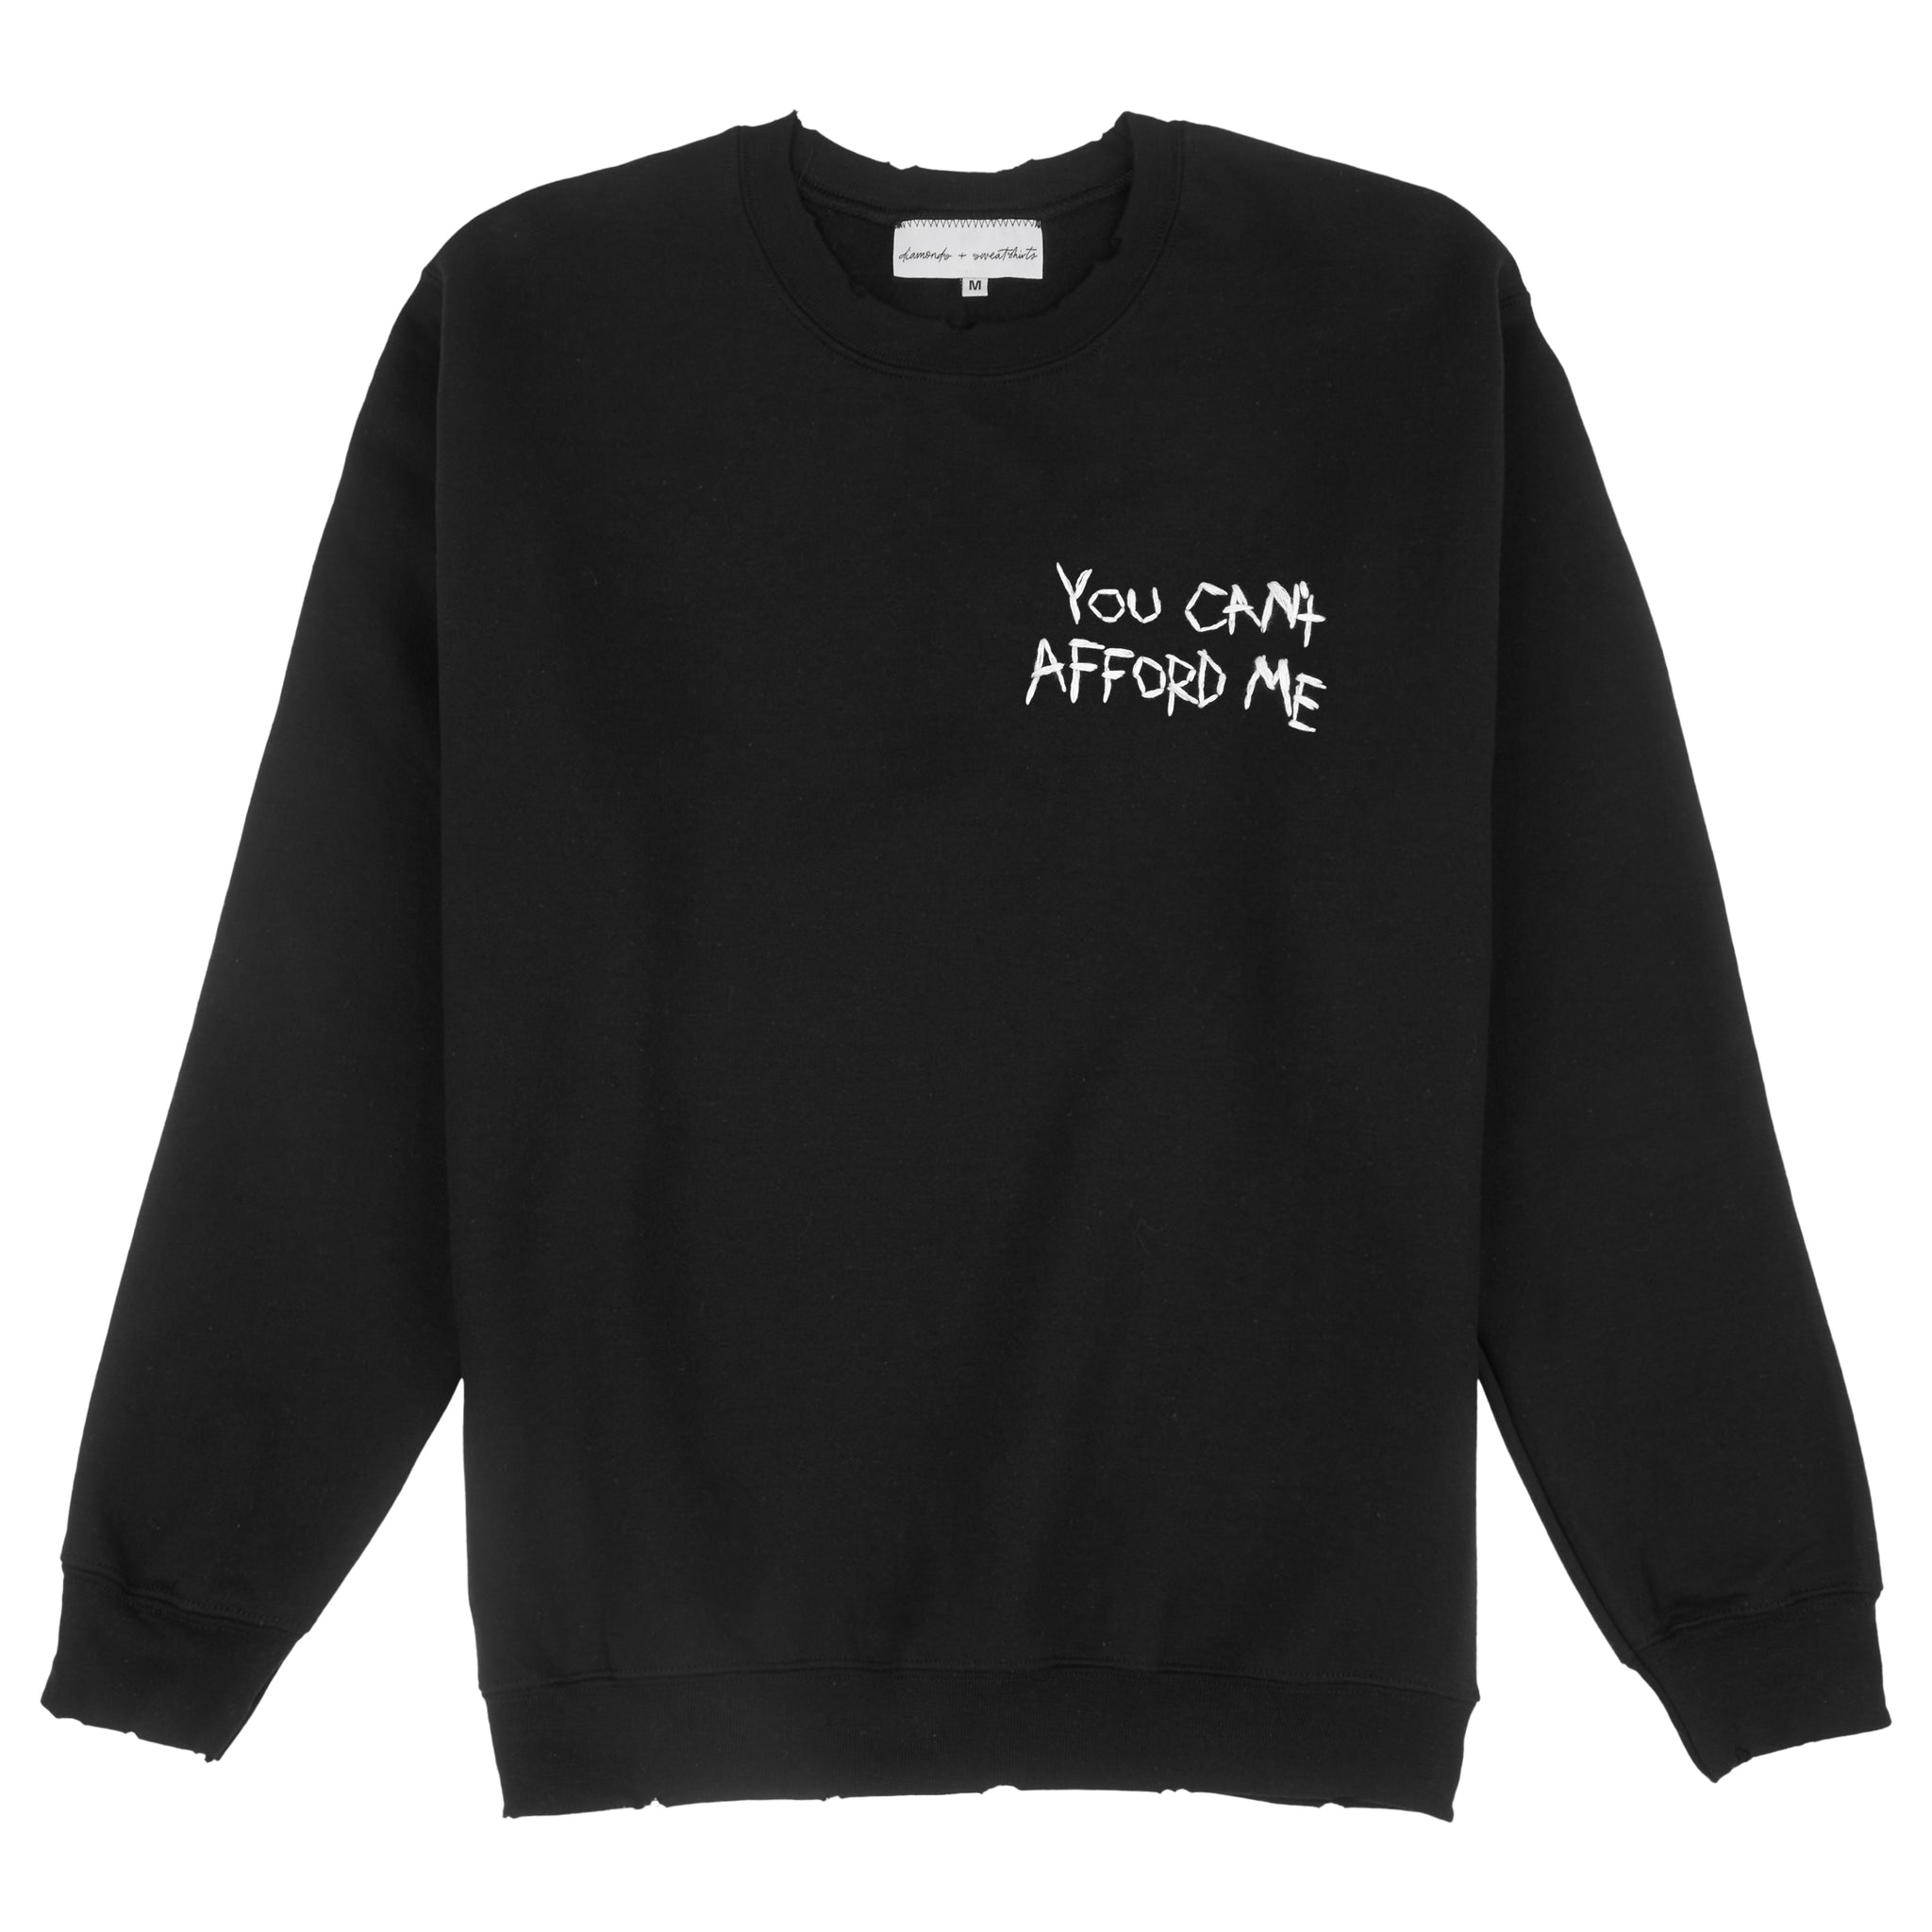 YOU CAN'T AFFORD ME sweatshirt